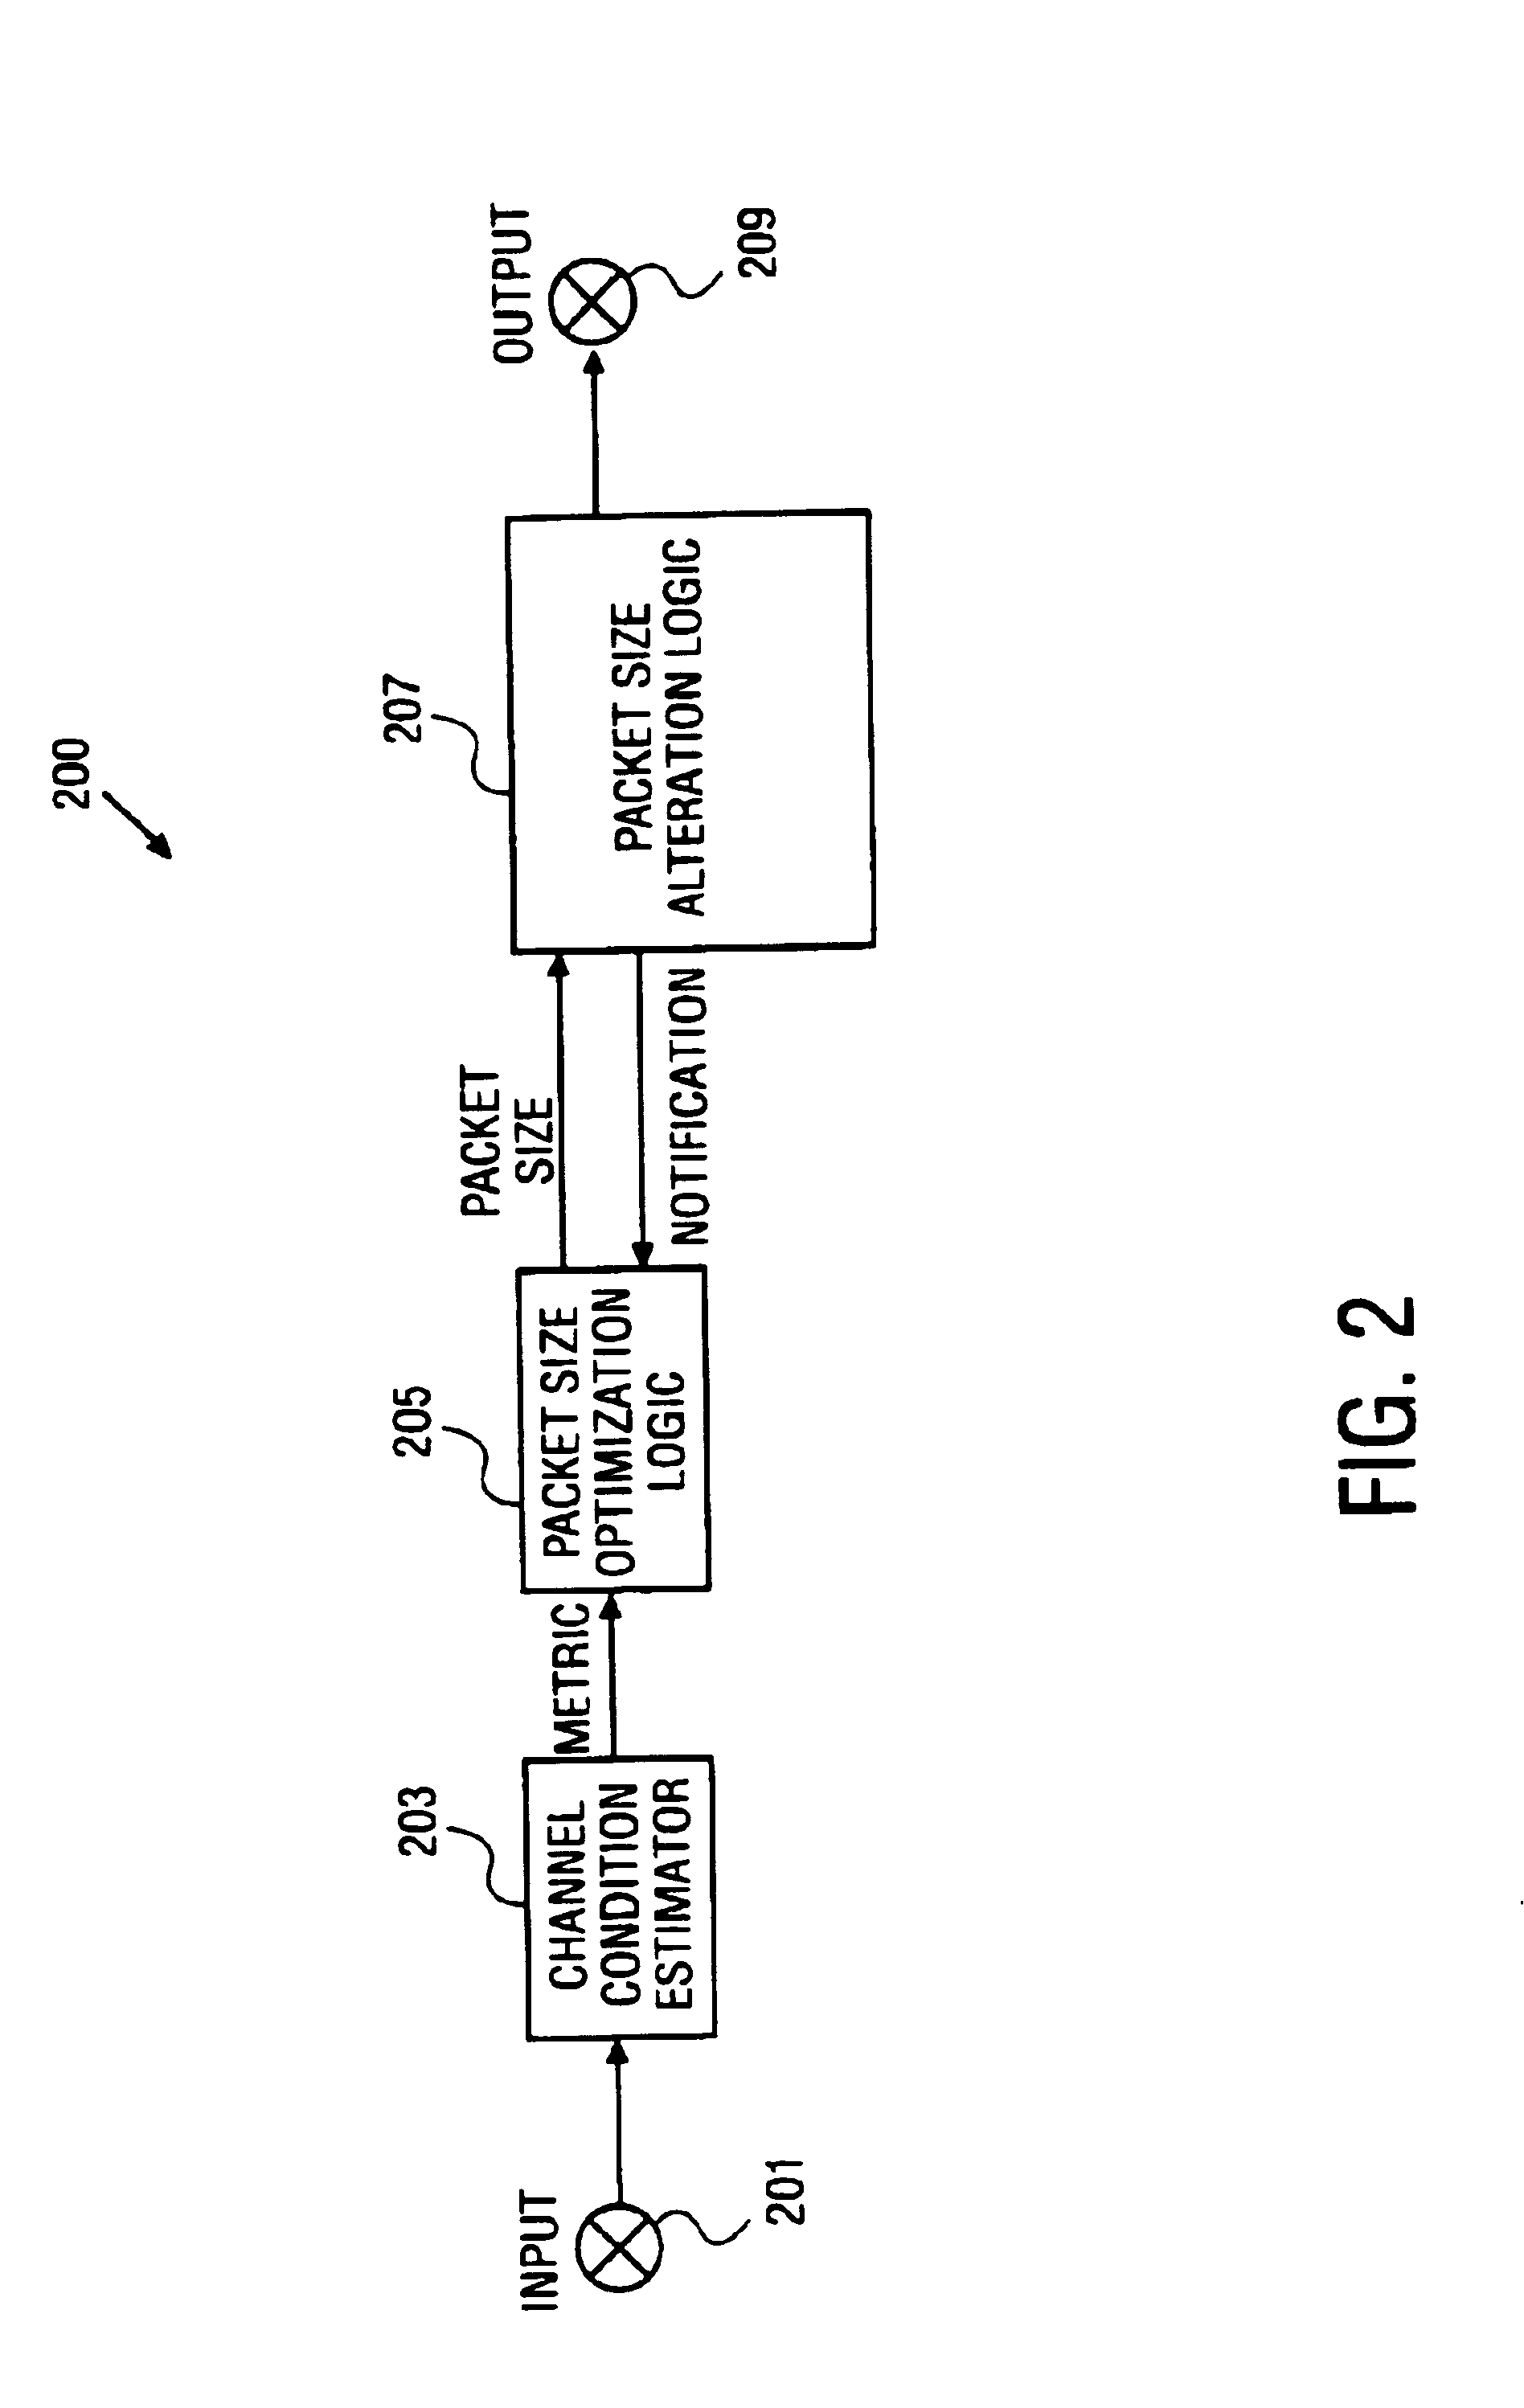 Method and apparatus for variable frame size radiolink protocol based on channel condition estimation